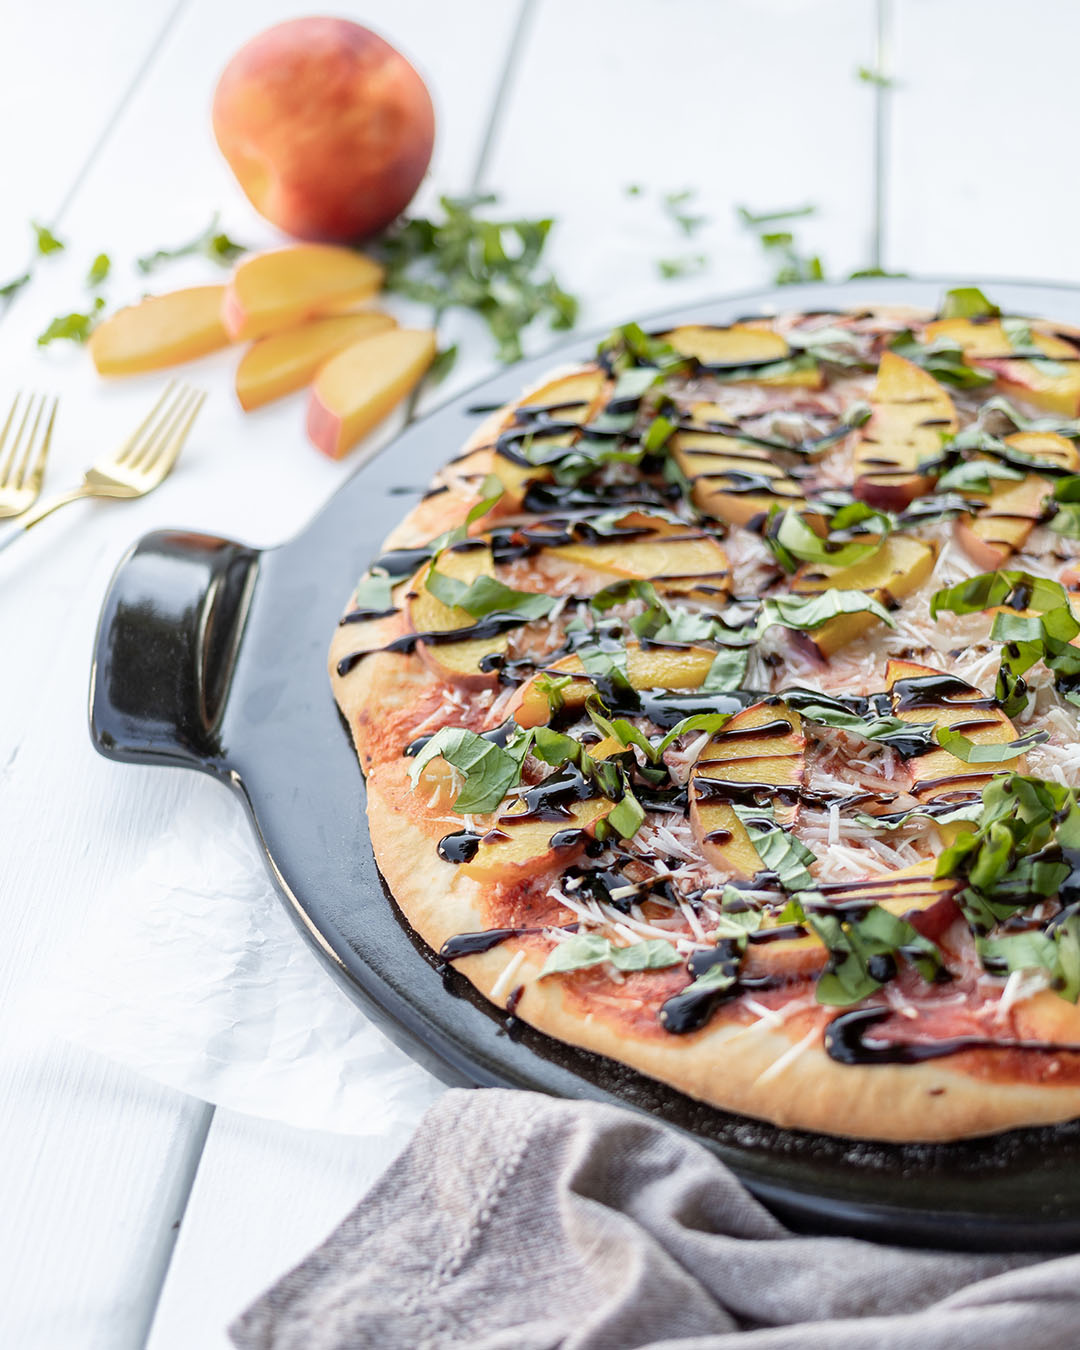 If you're still trying to hang on to those fresh summer flavours, but are also in the mood for pizza (who isn't?) try this surprisingly elegant and fresh-tasting plant-based peach basil pizza!